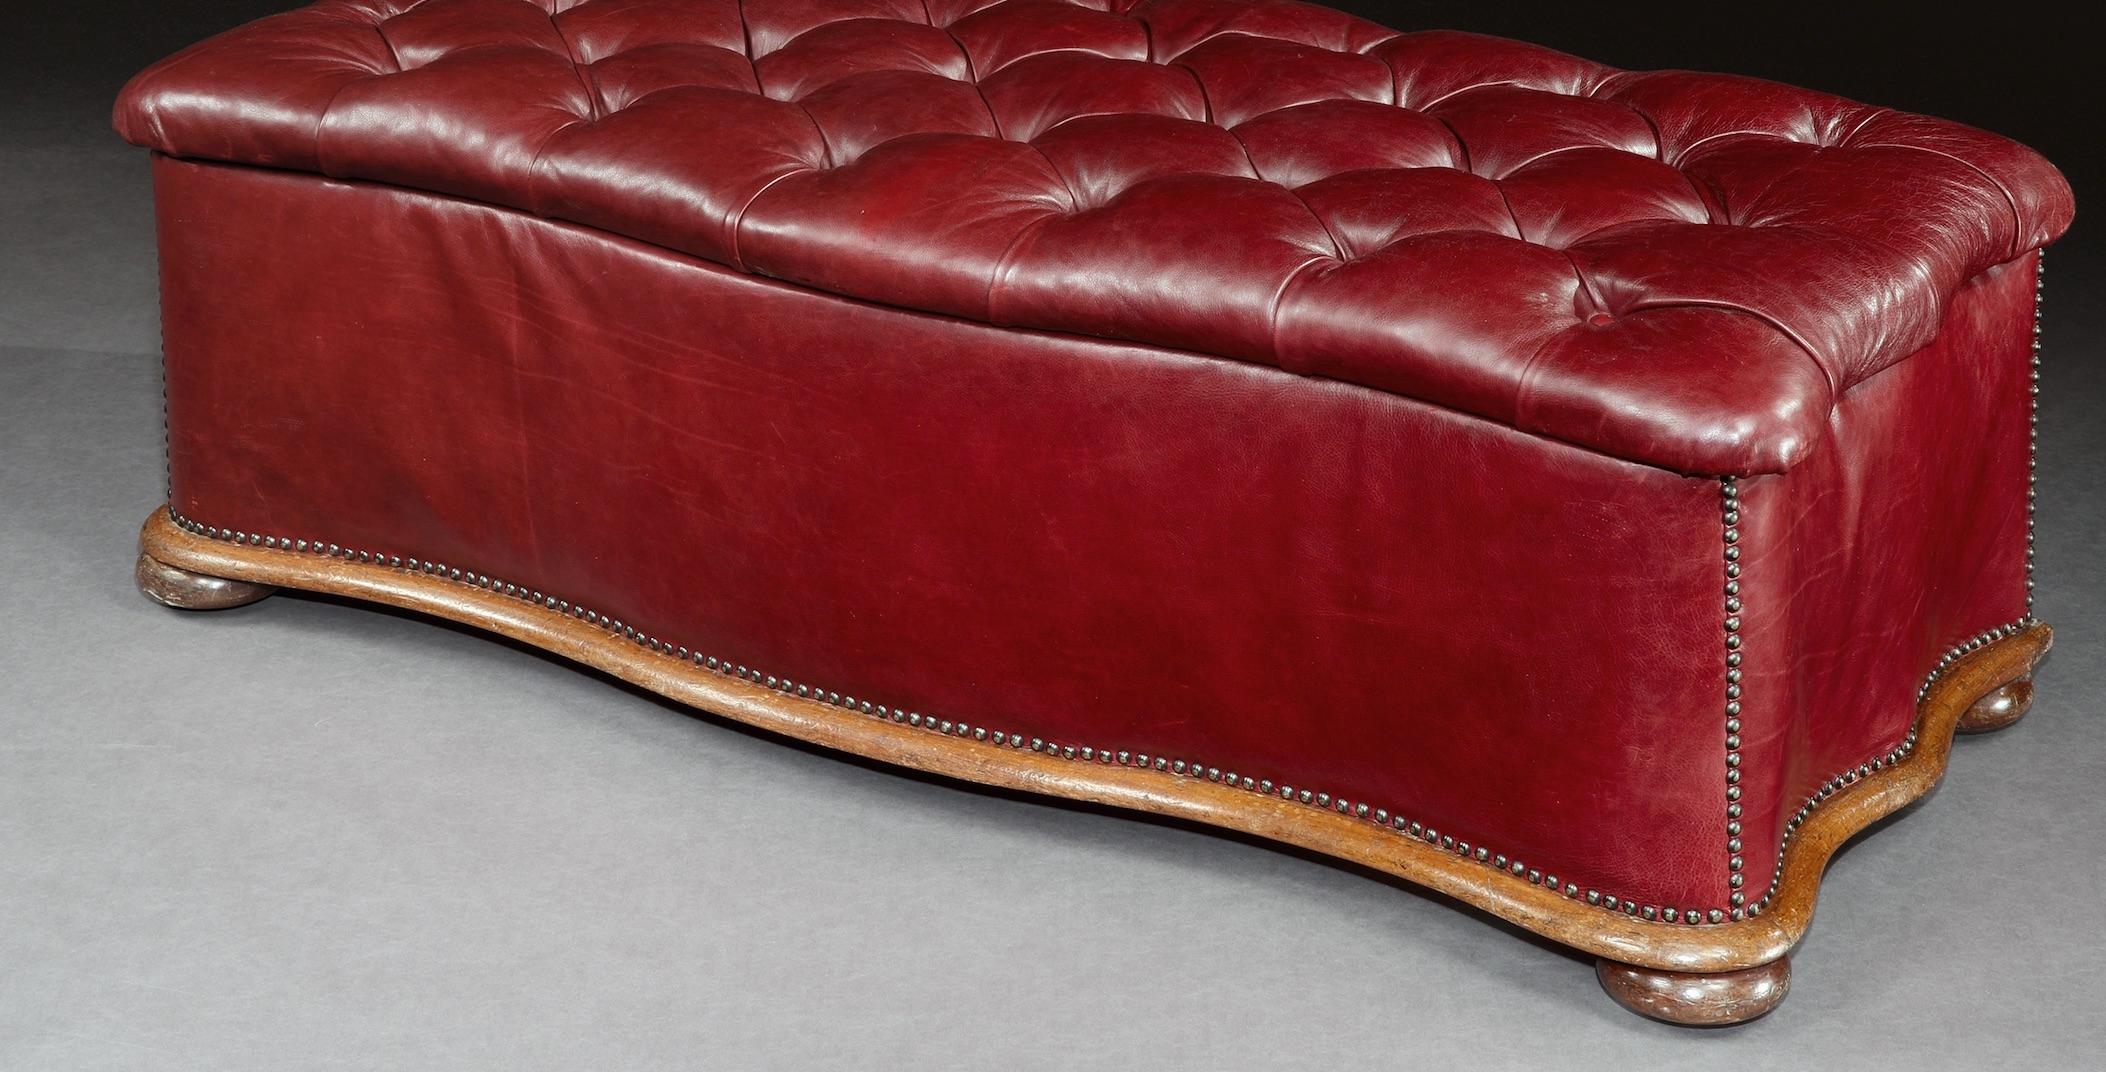 Ottoman, Leather, 19th Century, English, Victorian, Mahogany, Serpentine, Tufted For Sale 2